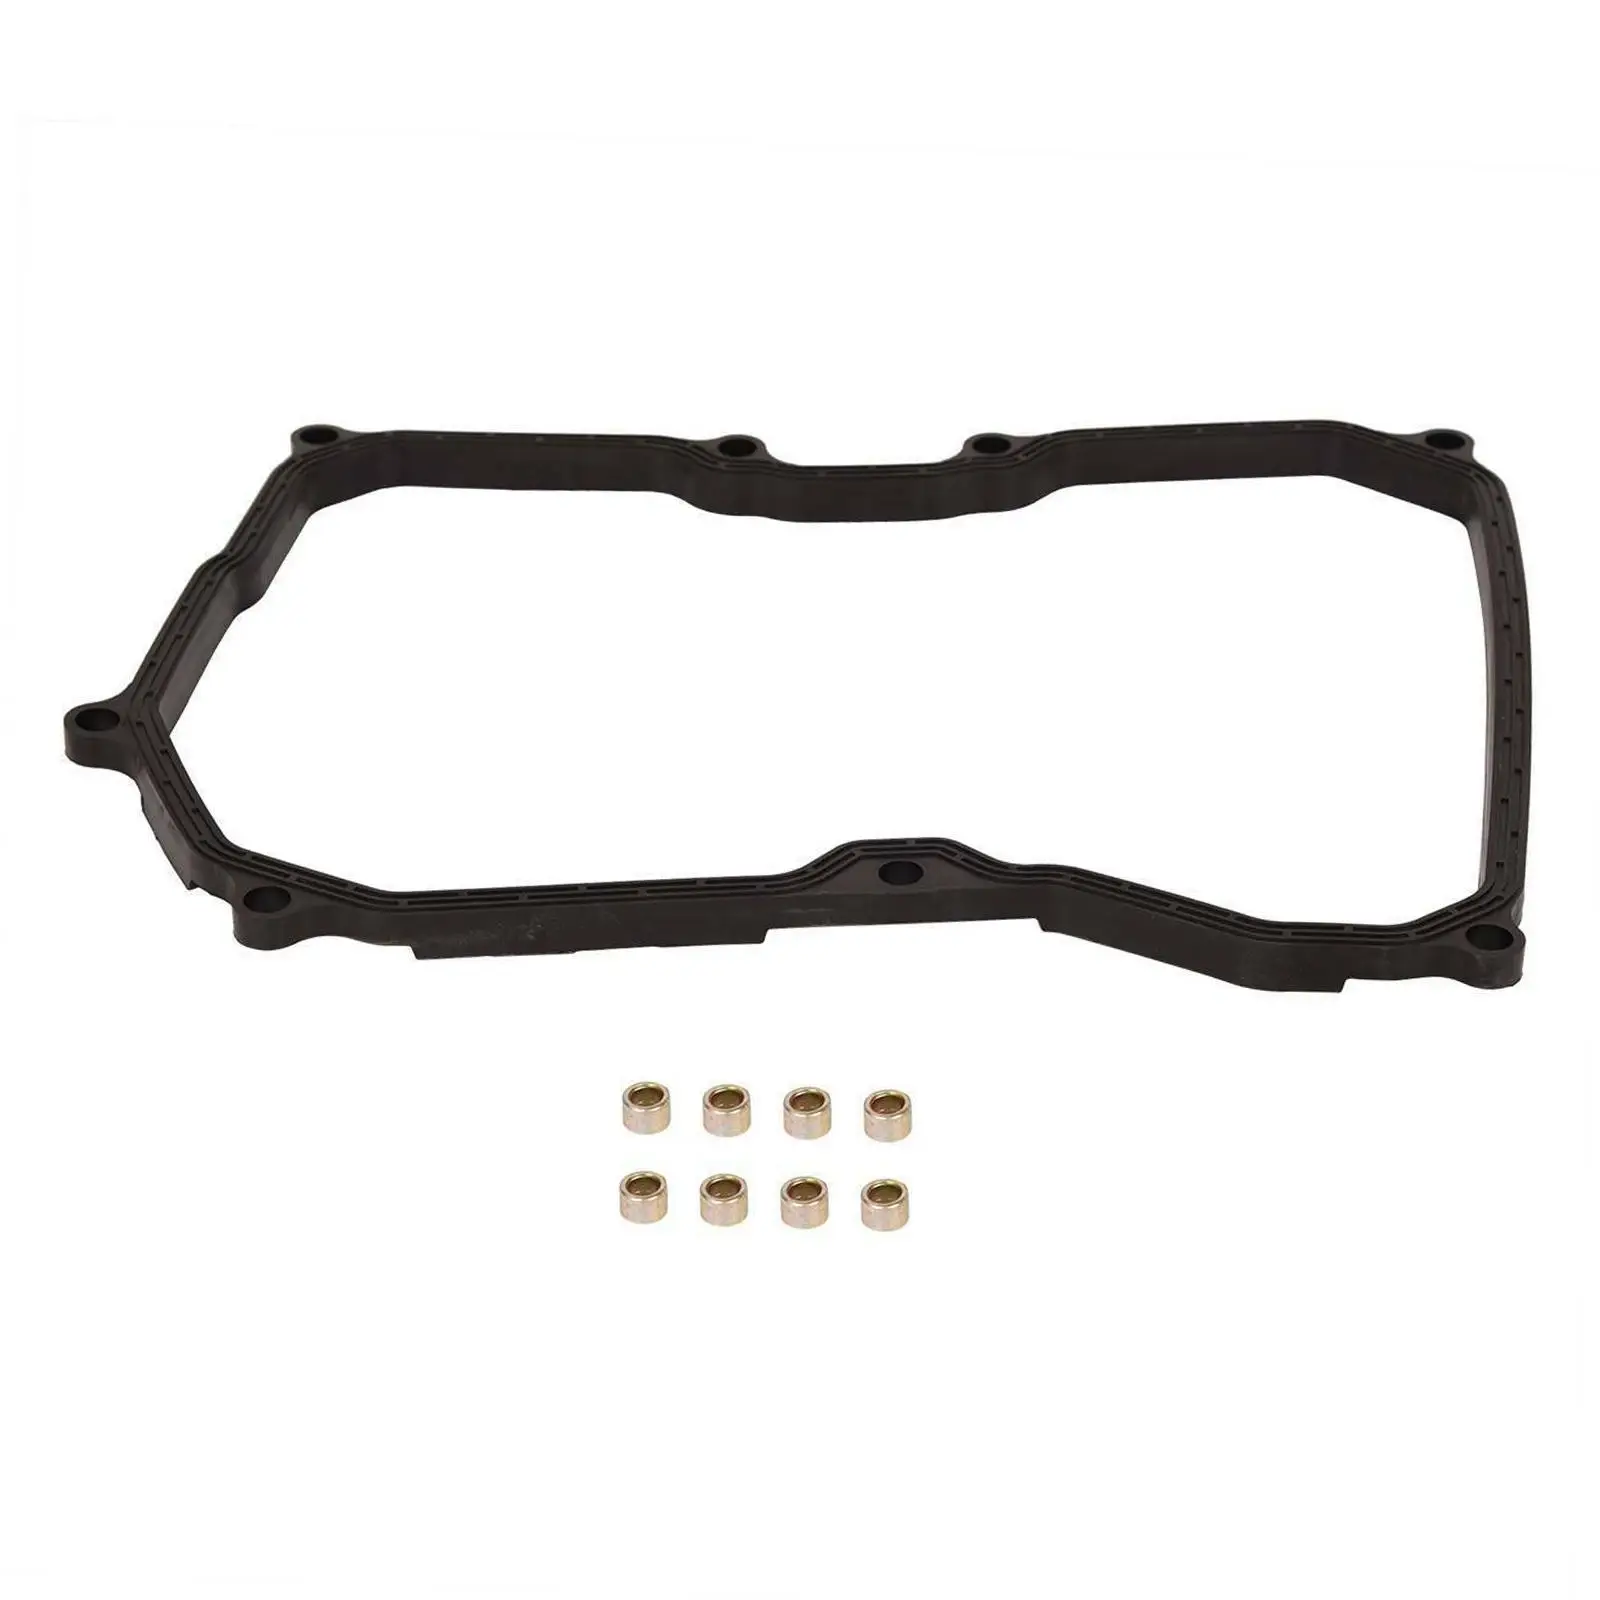 Transmission Pan Gasket Lightweight for Mini 2007+ Spare Parts Replace